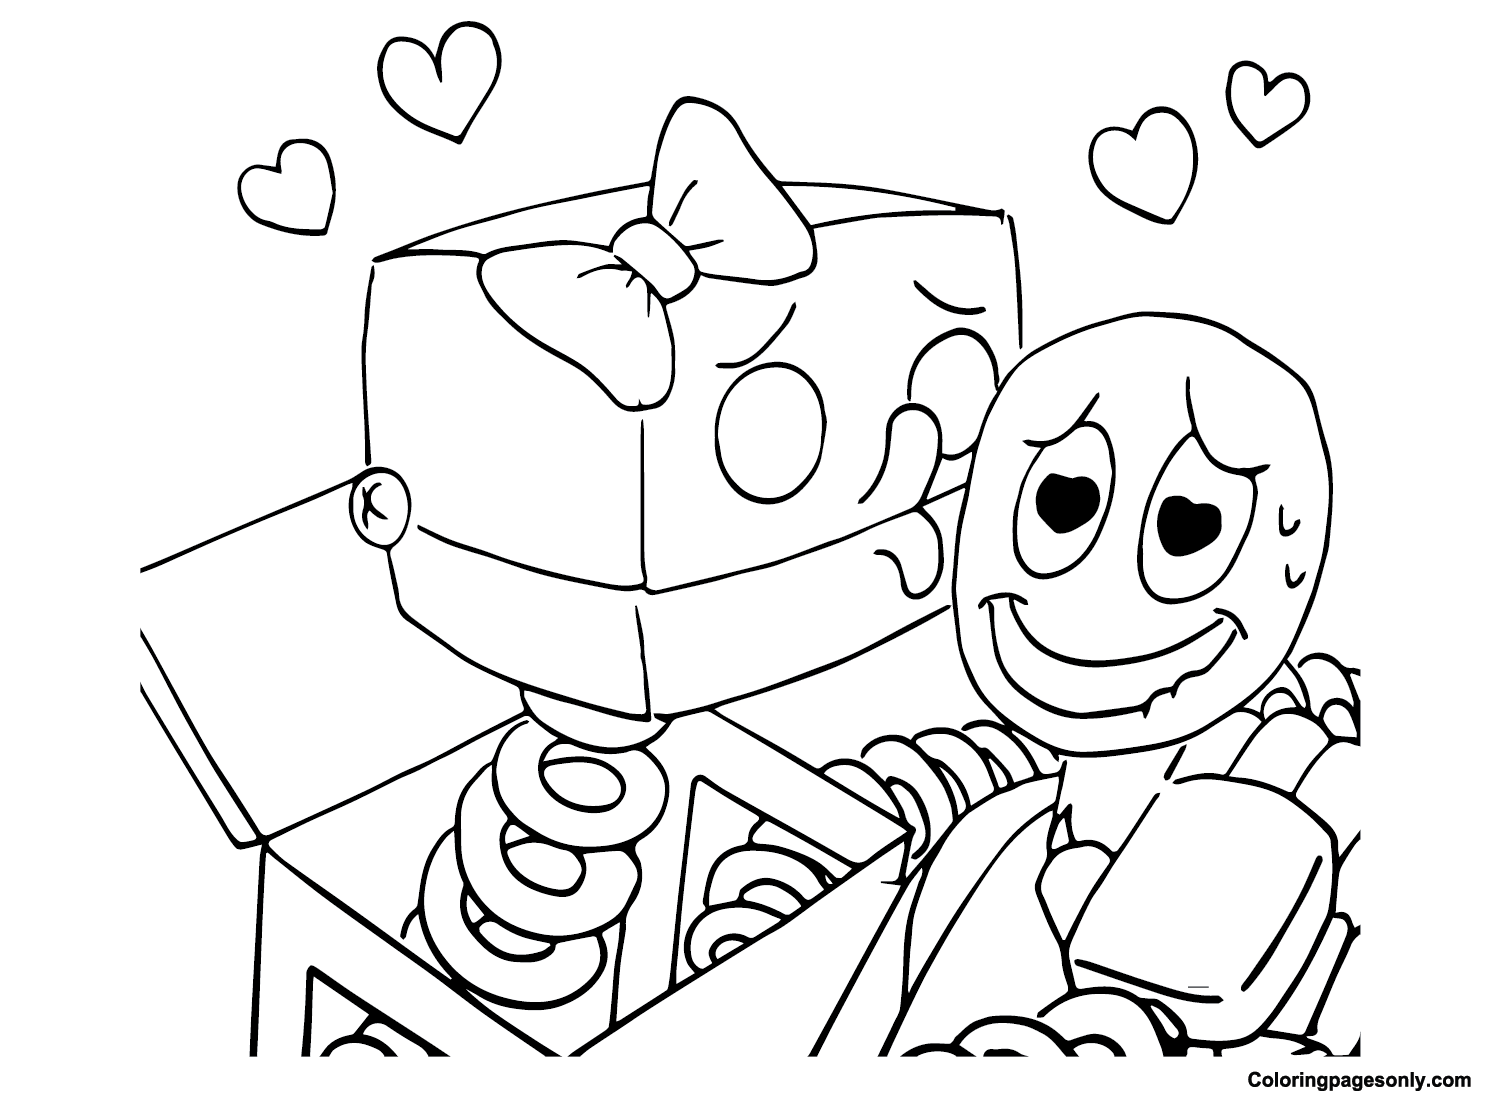 Boxy Boo Valentine Coloring Pages